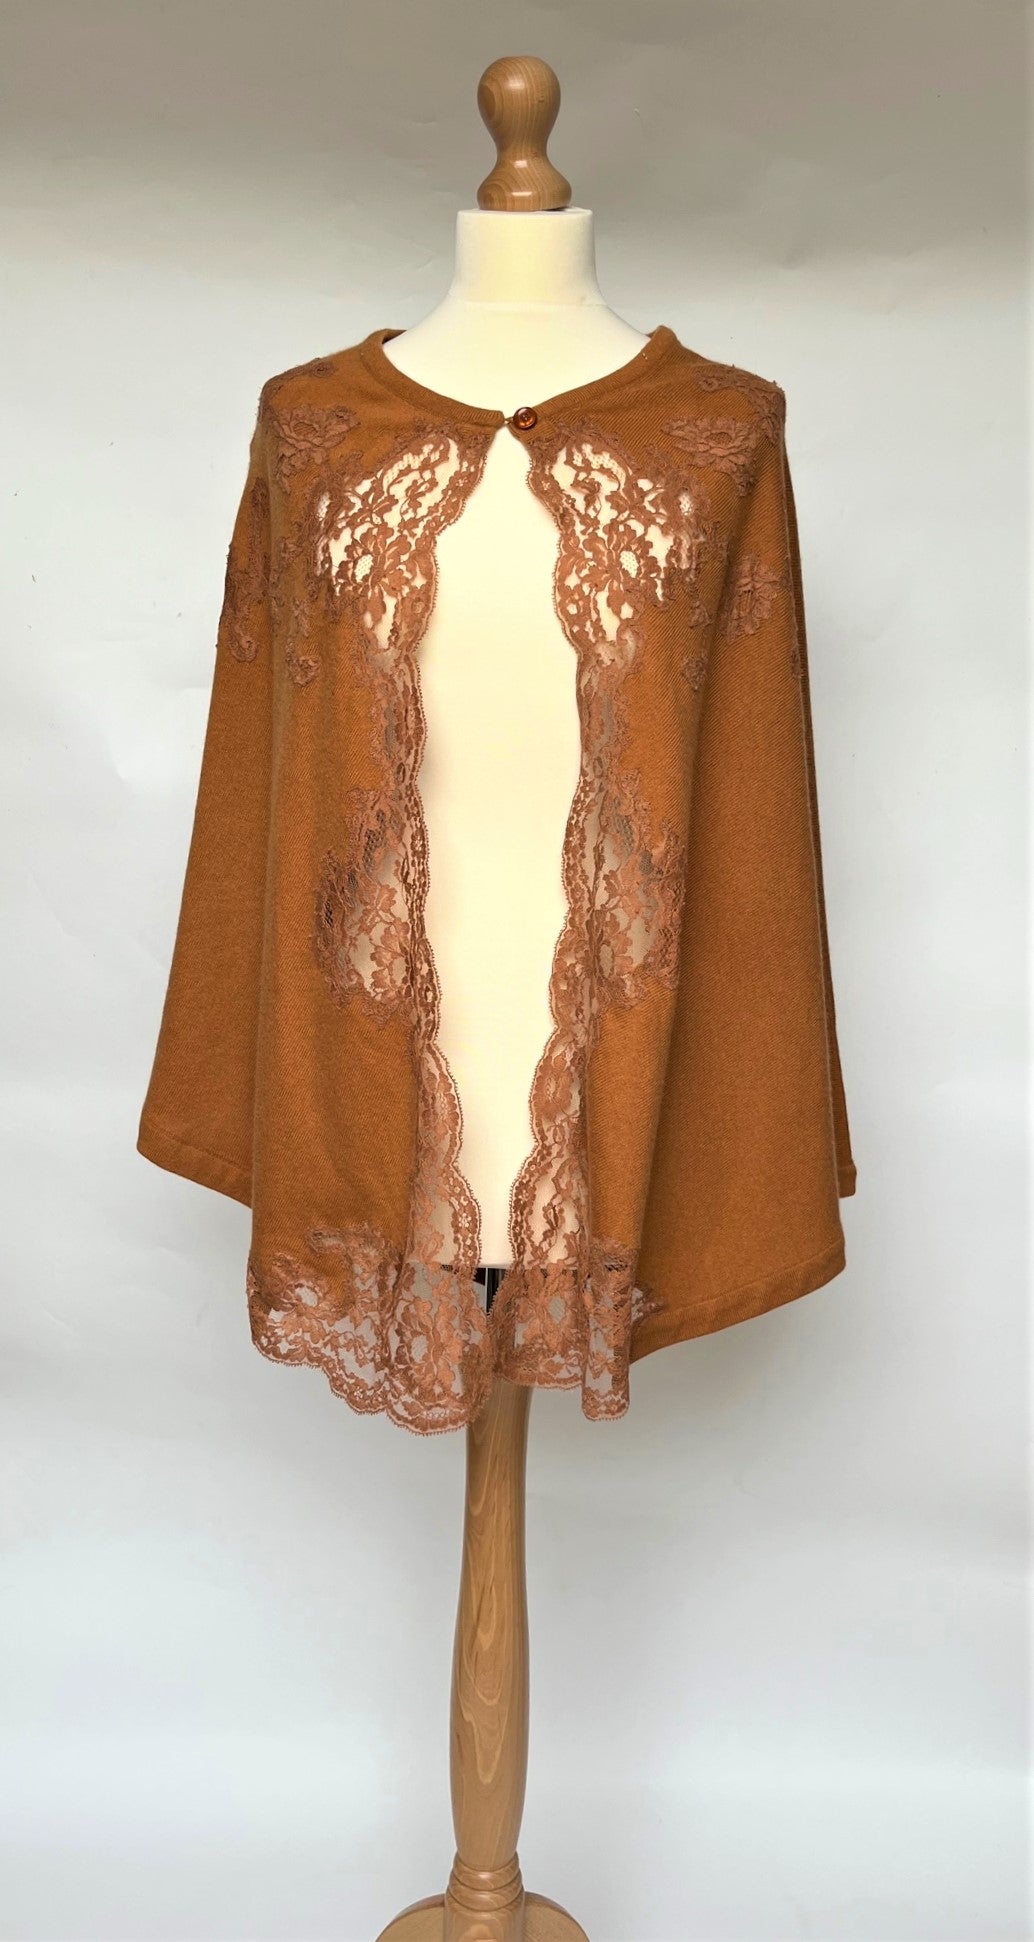 SALE Marjolaine Poncho style Bedjacket in a warm copper shade. Made from 100% pure cashmere it has colour matched appliqué lace inserts at the front, running along the opening edge, finishing beautifully on the corners of the hem edge. There is a one cashmere covered button detail.  Fabric: 100% Cashmere Lace: Leavers-Calais 